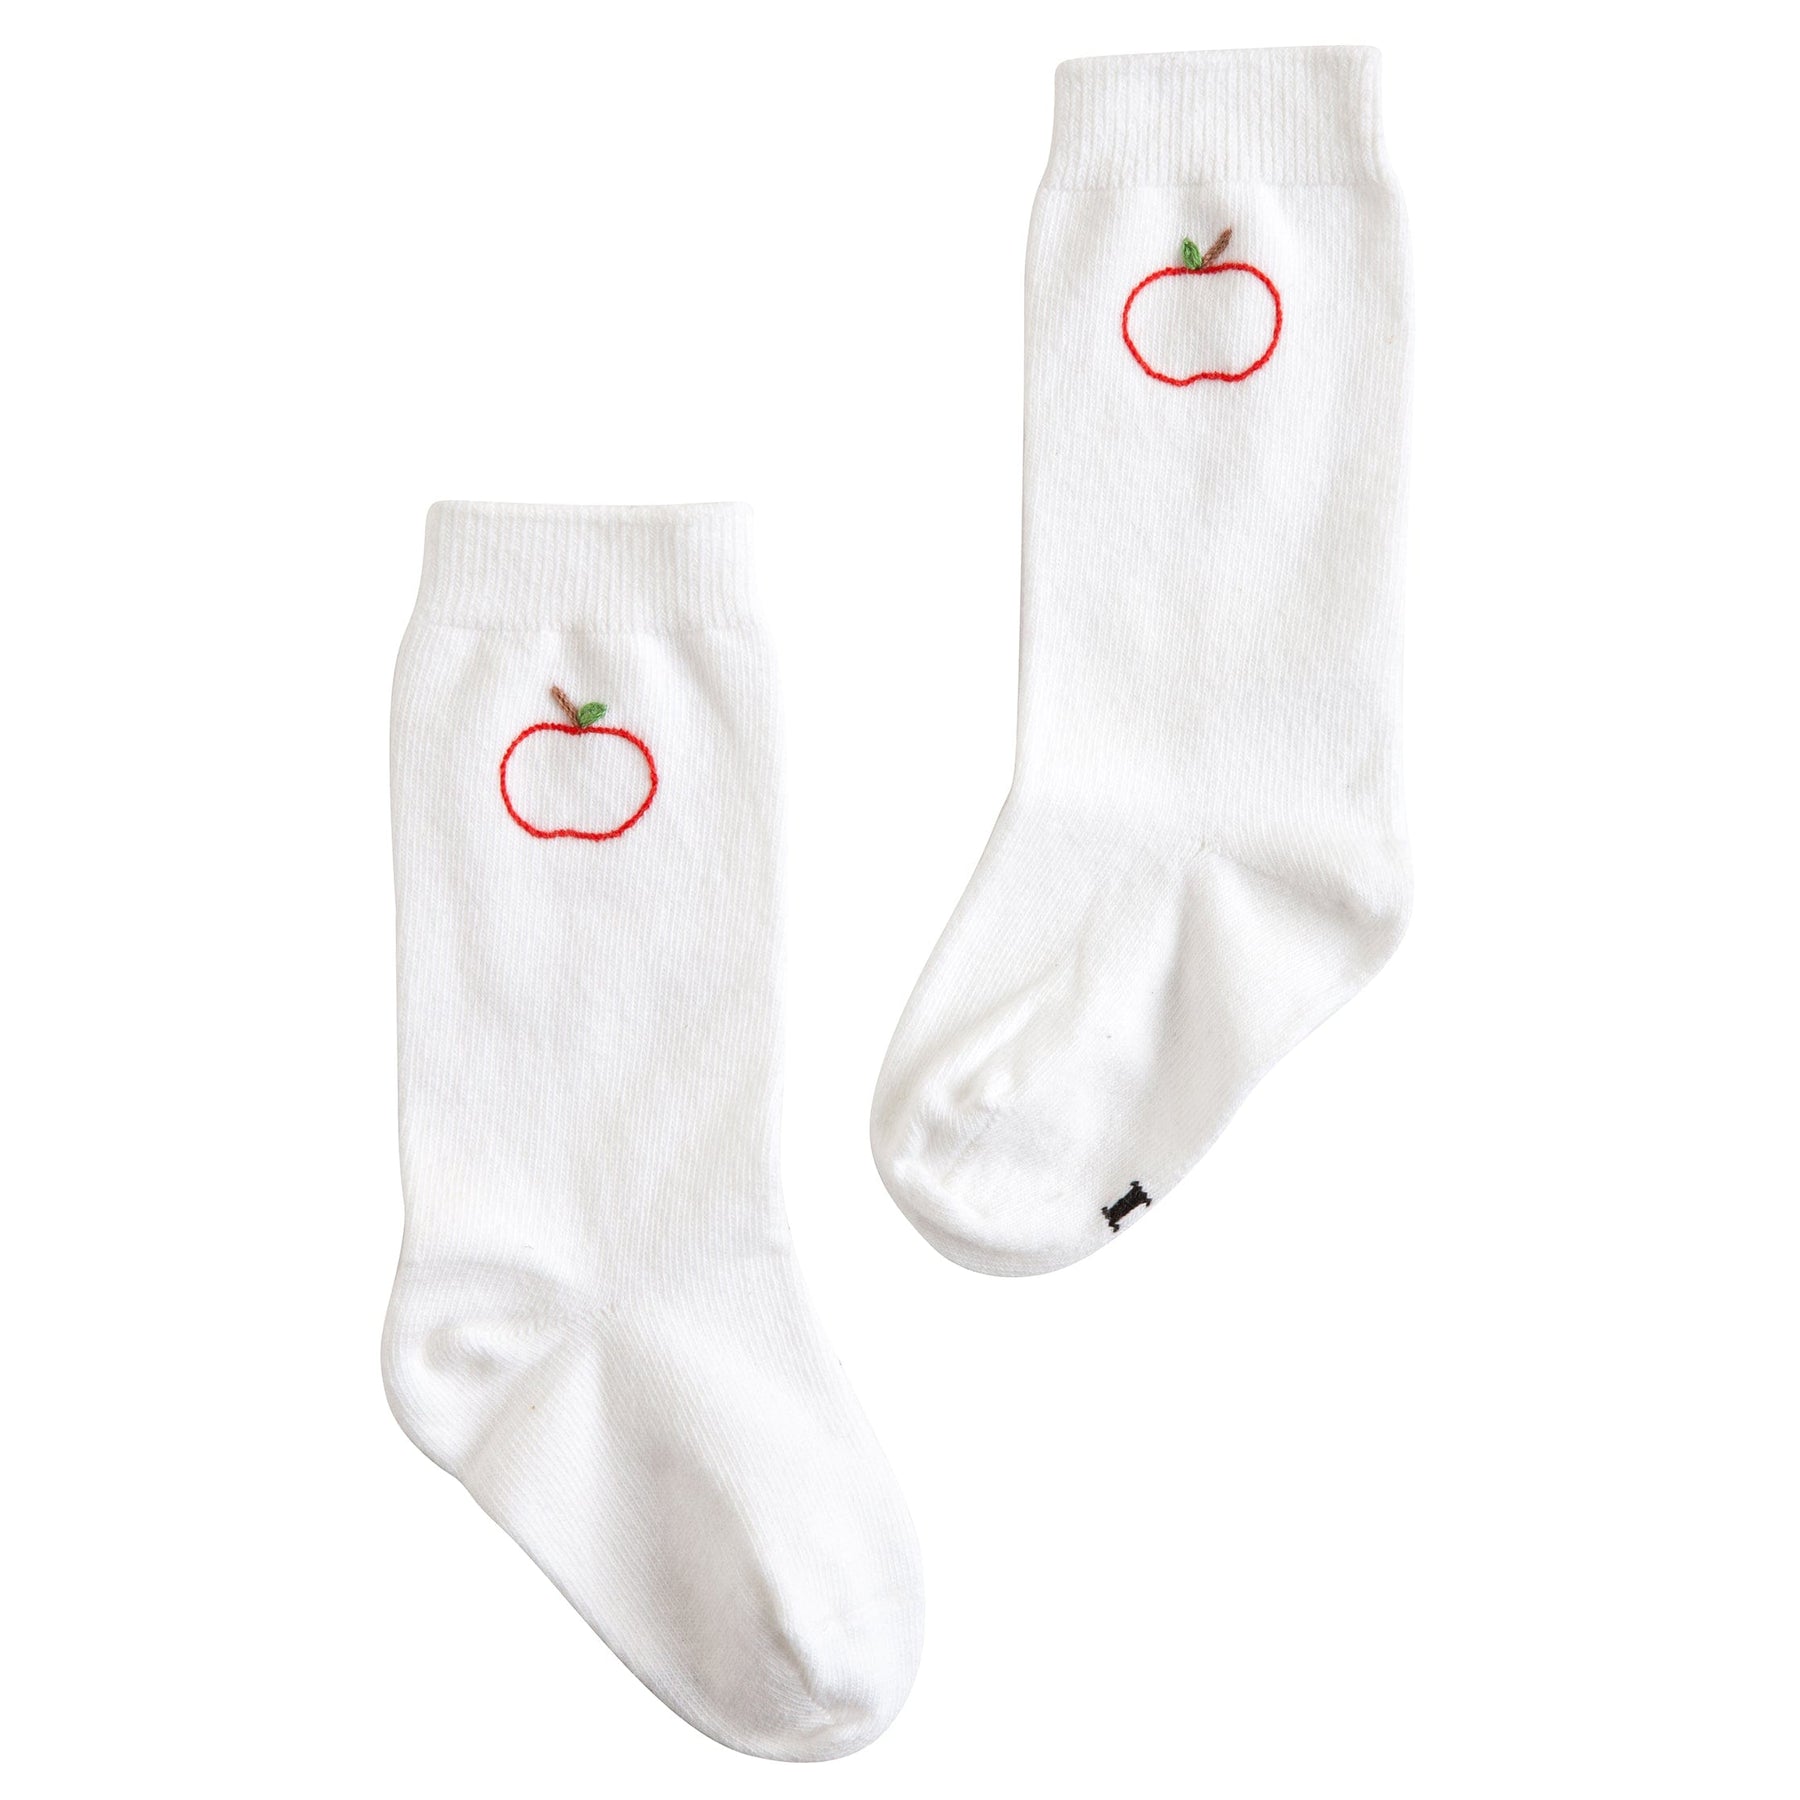 seguridadindustrialcr classic childrens clothing unisex white knee high socks with embroidered apples